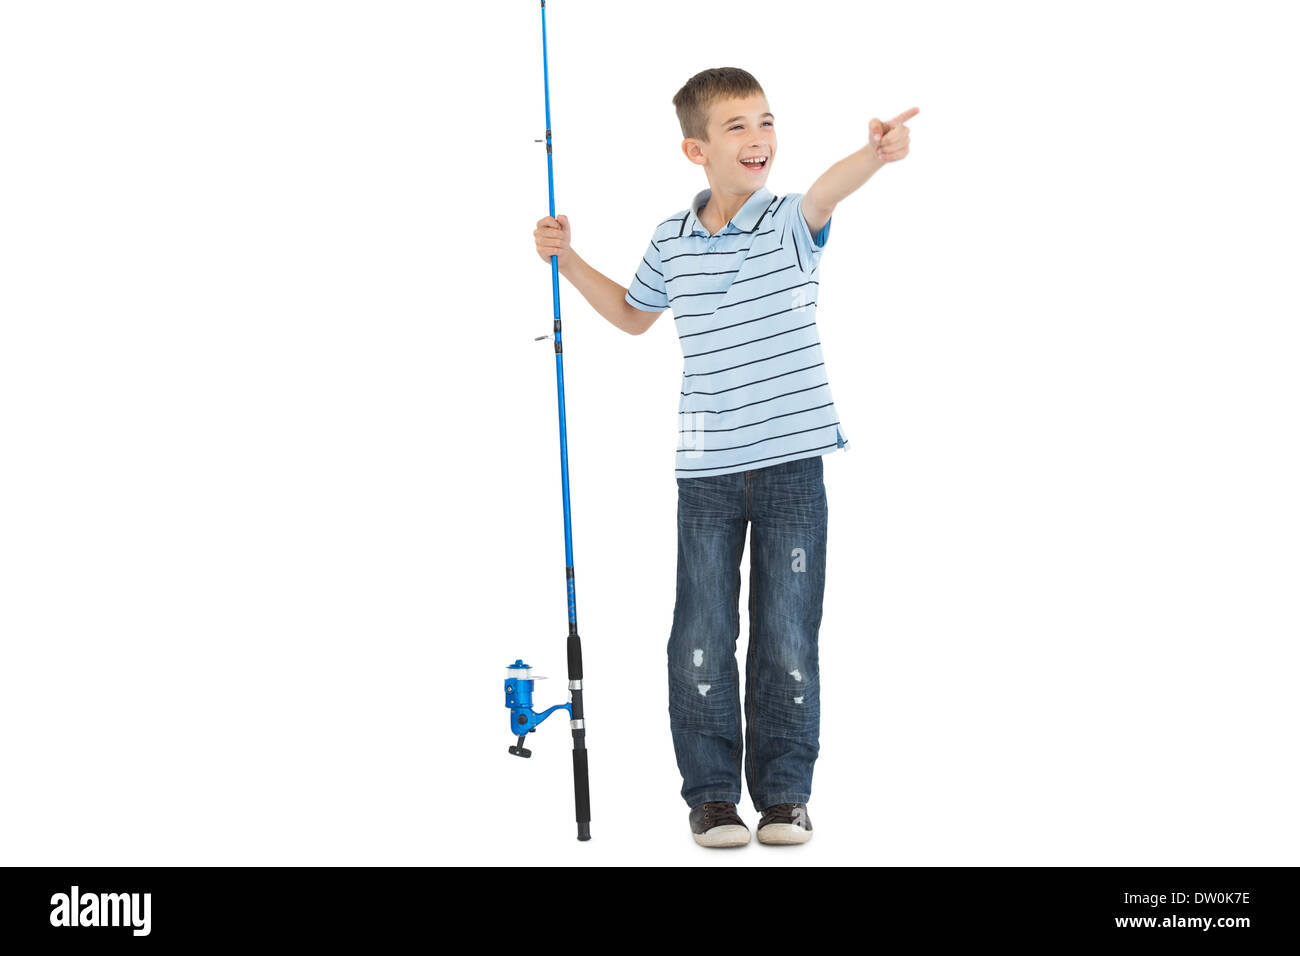 Boy with fishing rod Cut Out Stock Images & Pictures - Alamy